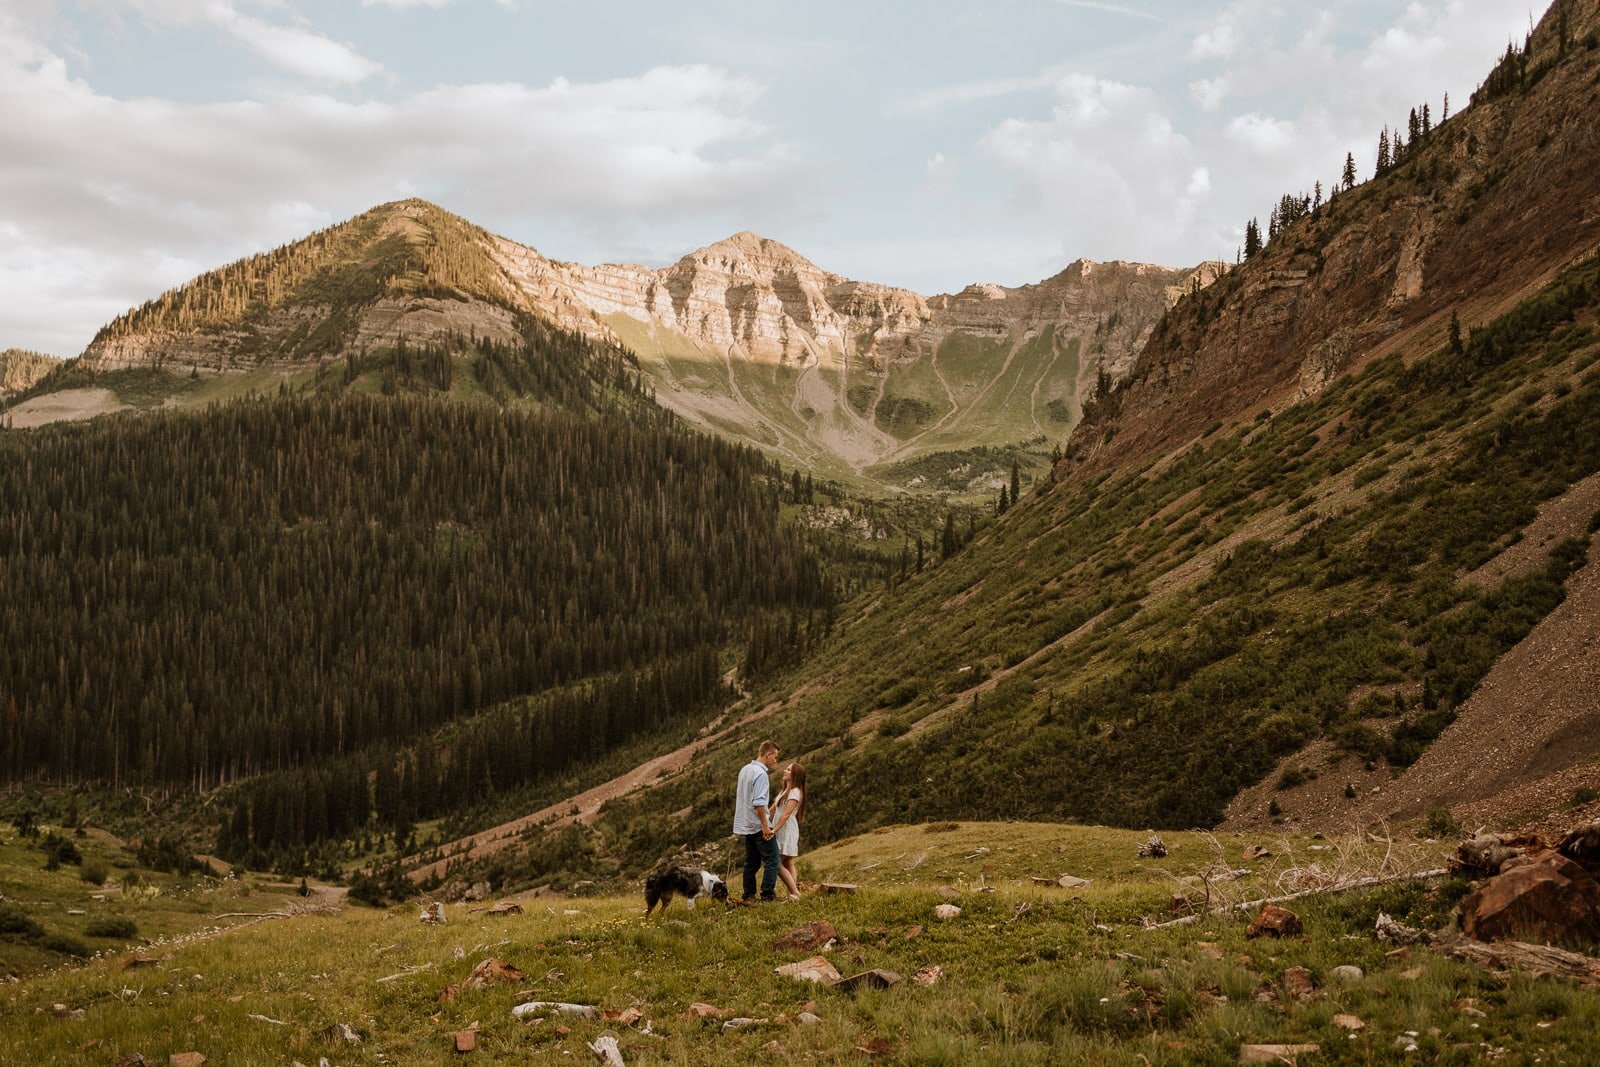 Paige & Skyler literally crossed rivers to get to this beautiful location in the Colorado mountains. After driving a Jeep up the road, we hiked the hill and they shared a kiss right at sunset with the Colorado mountains lit up behind them.